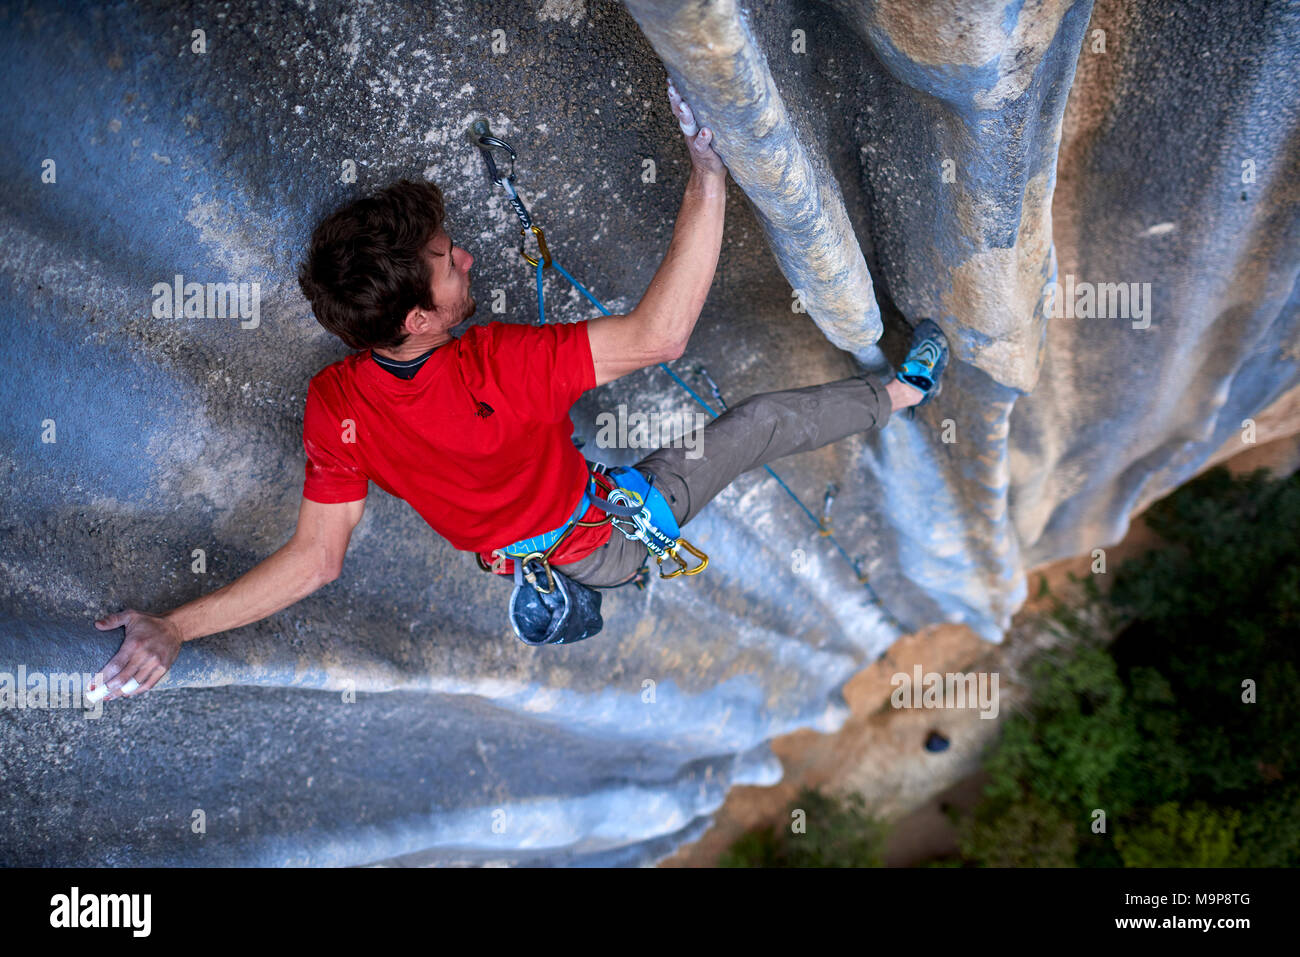 Stefano Ghisolfi - The route is Meconi, one of the beautiful 8a I